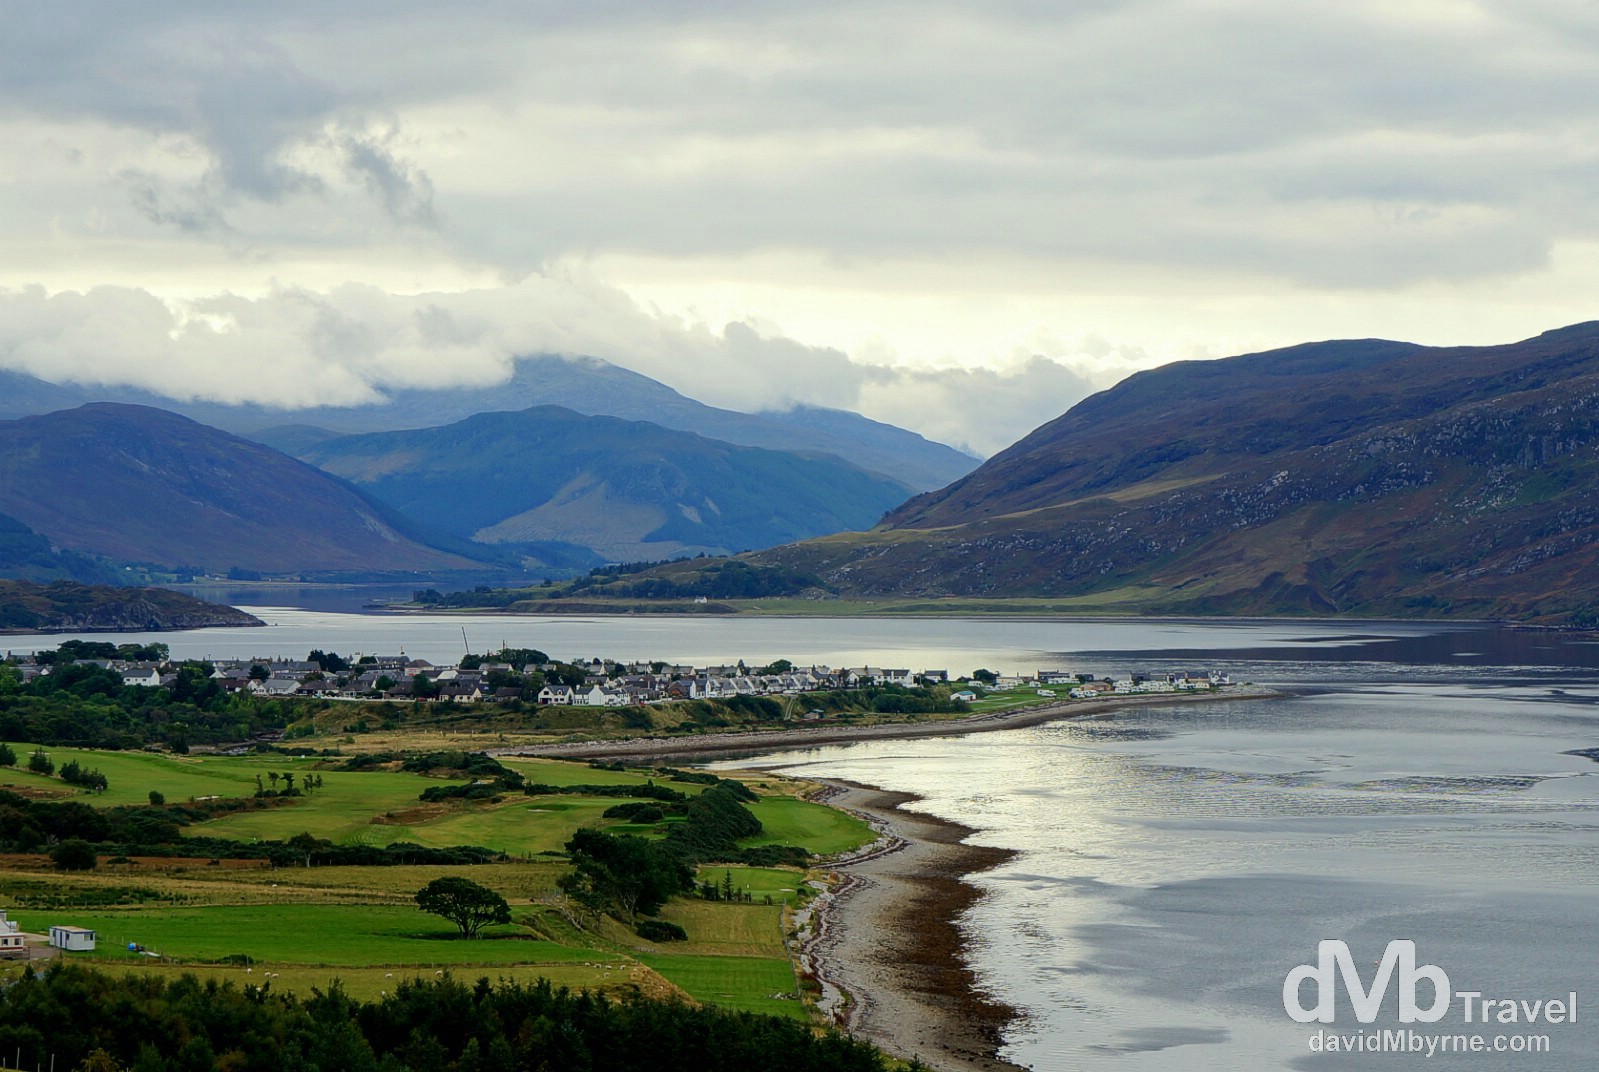 The town of Ullapool on the eastern shore of Lock Broom as seen from the A835 entering town. Highlands, Scotland. September 16, 2014.